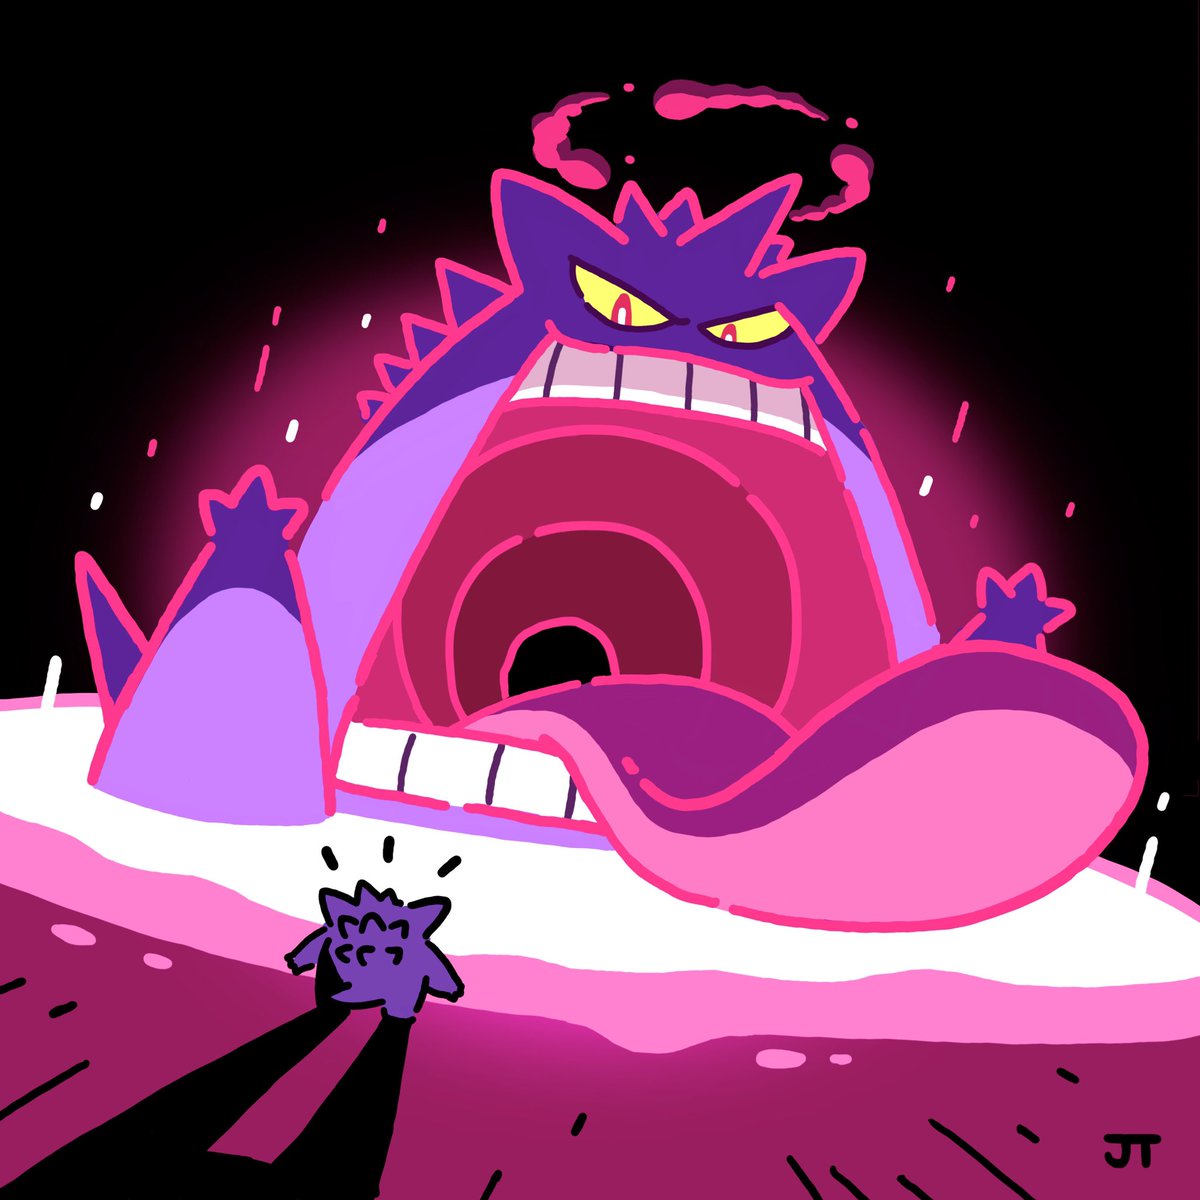 Say ahhhhh 👻 
I designed Gigantamax Gengar for Pokémon Sword and Shield. I’m a fan of Gengar and it was a thrill to make it biiiiig